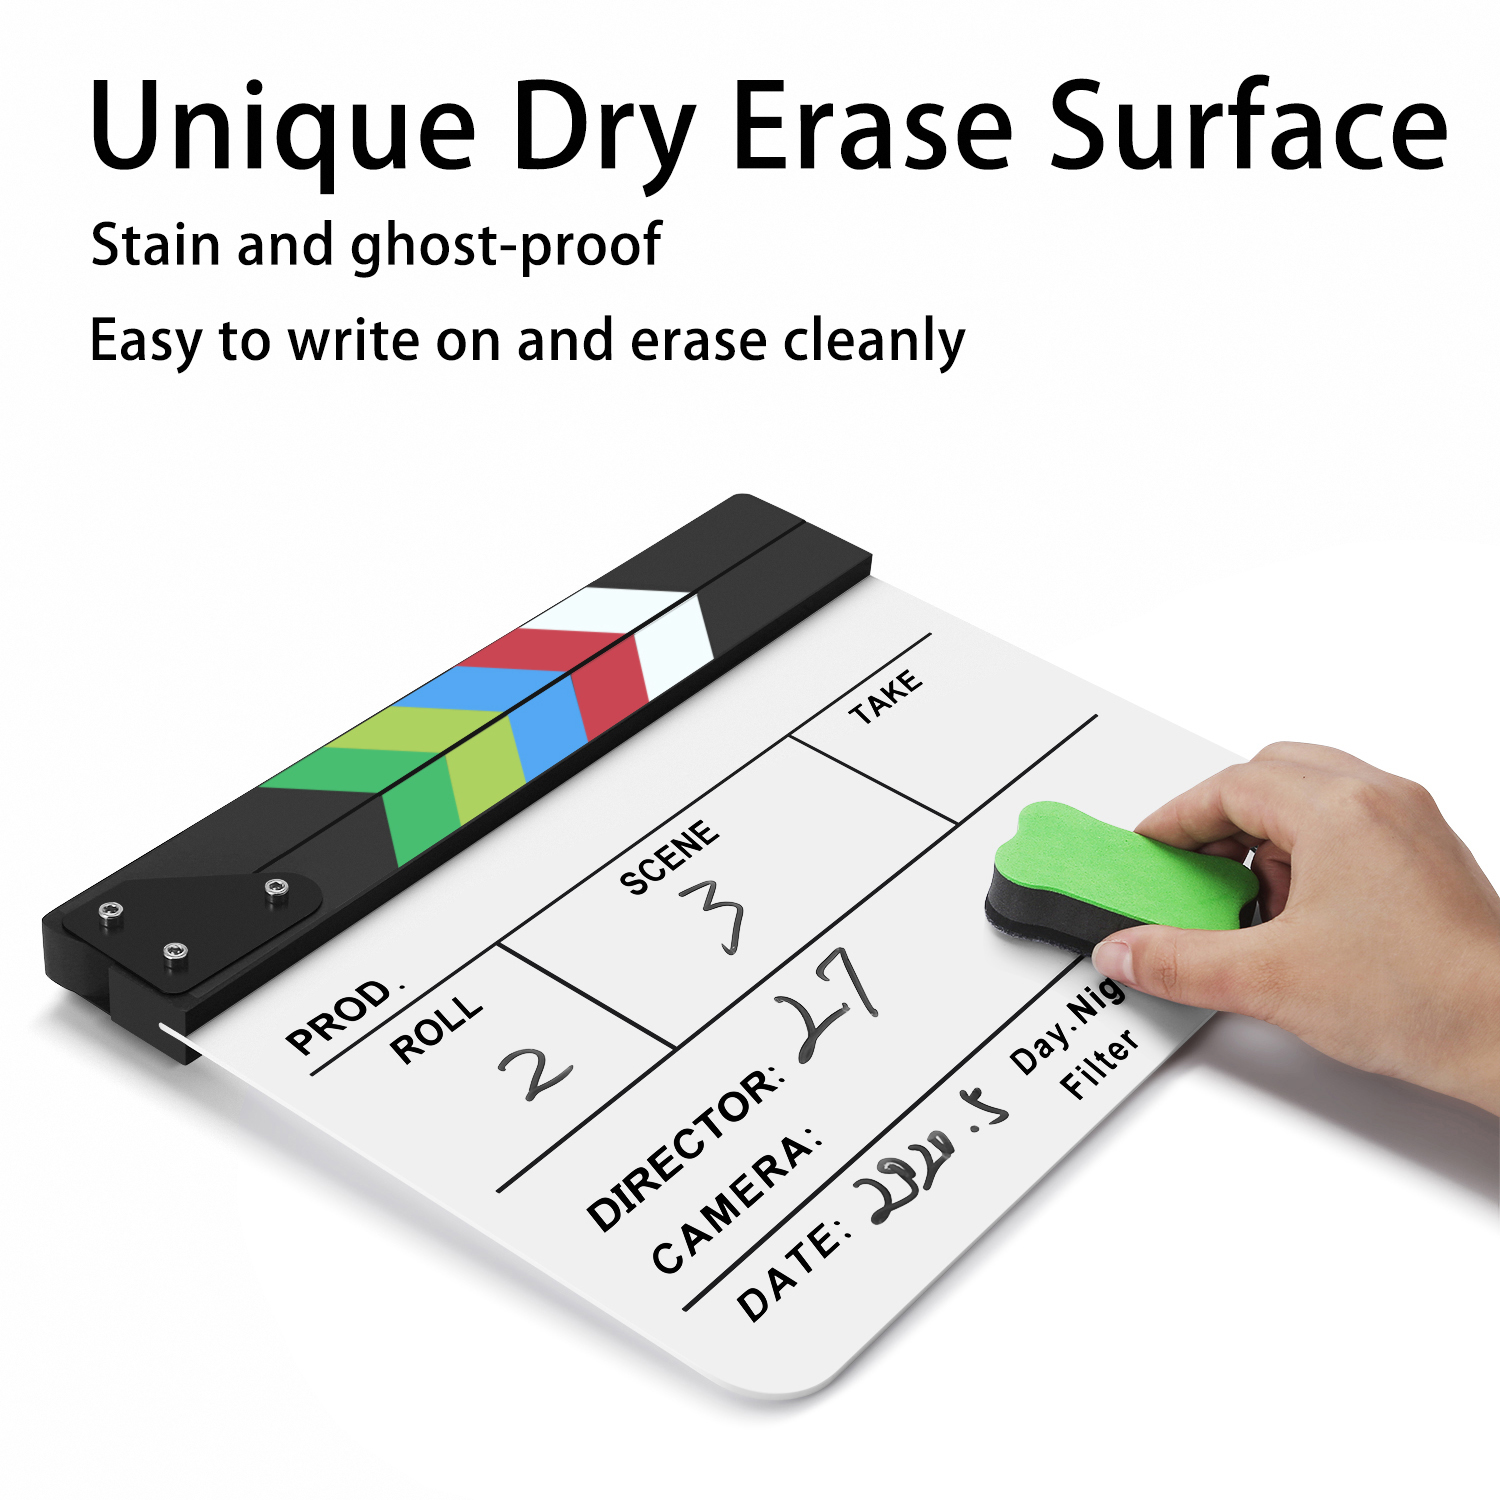 Built-in Magnet - This directors clapboard has a bult-in magnet while the sound is stable,  professional and resonant while being clapped. The compact design and size makes it convenient to carry and store in any shooting set